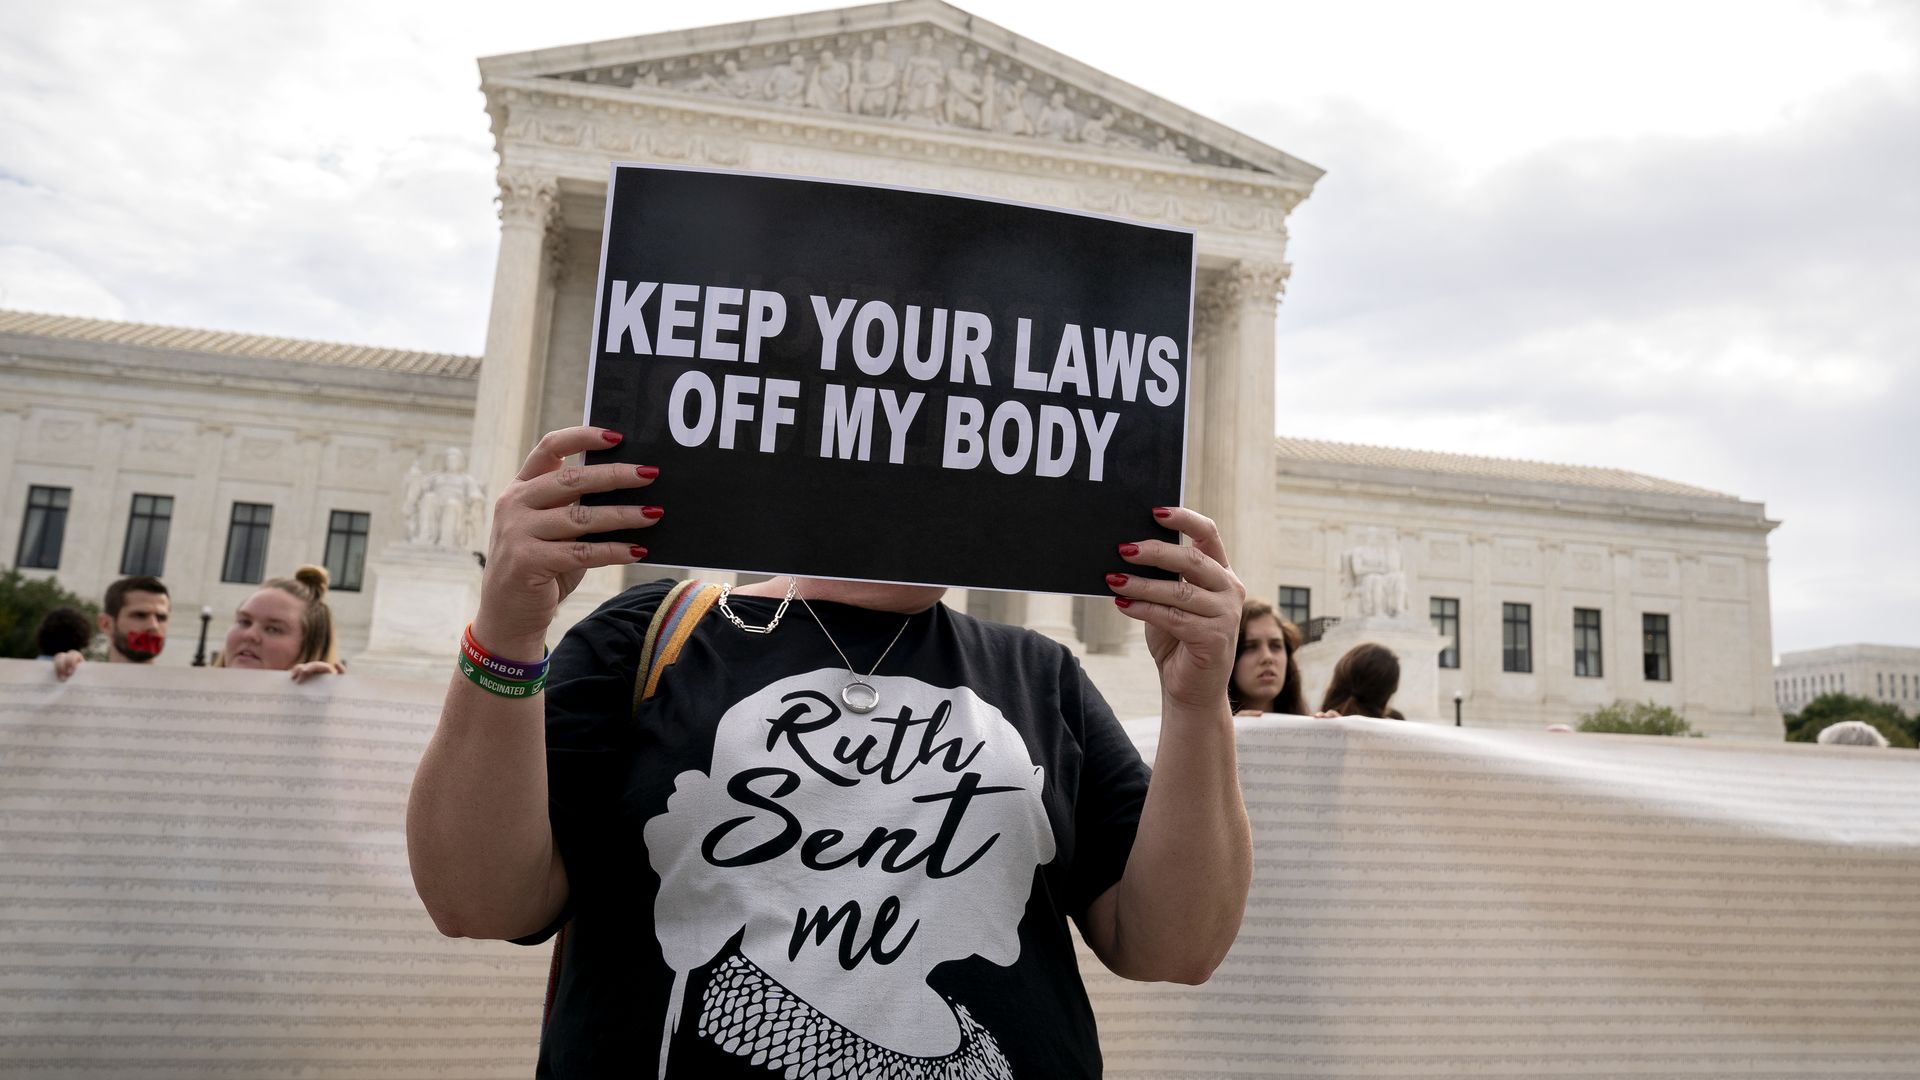 Photo of a protester holding a sign that says "Keep your laws off my body" and wearing a shirt that says "Ruth sent me"